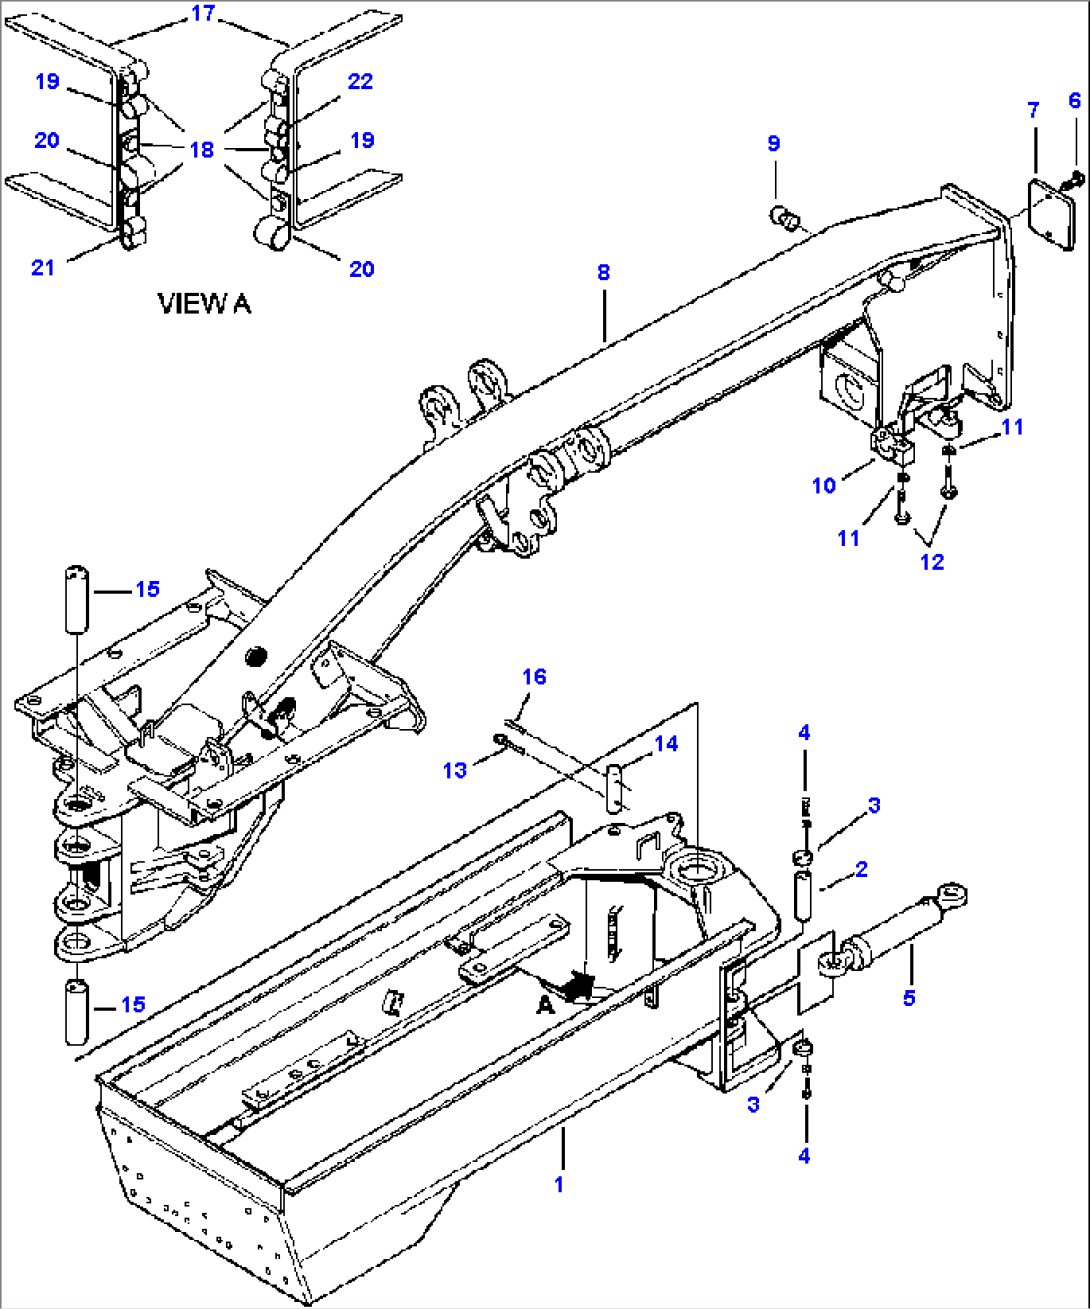 MAIN FRAME 530 2B - R.H. AND L.H. 90 DEGREES BLADE SUSPENSION - S/N 203959 AND UP